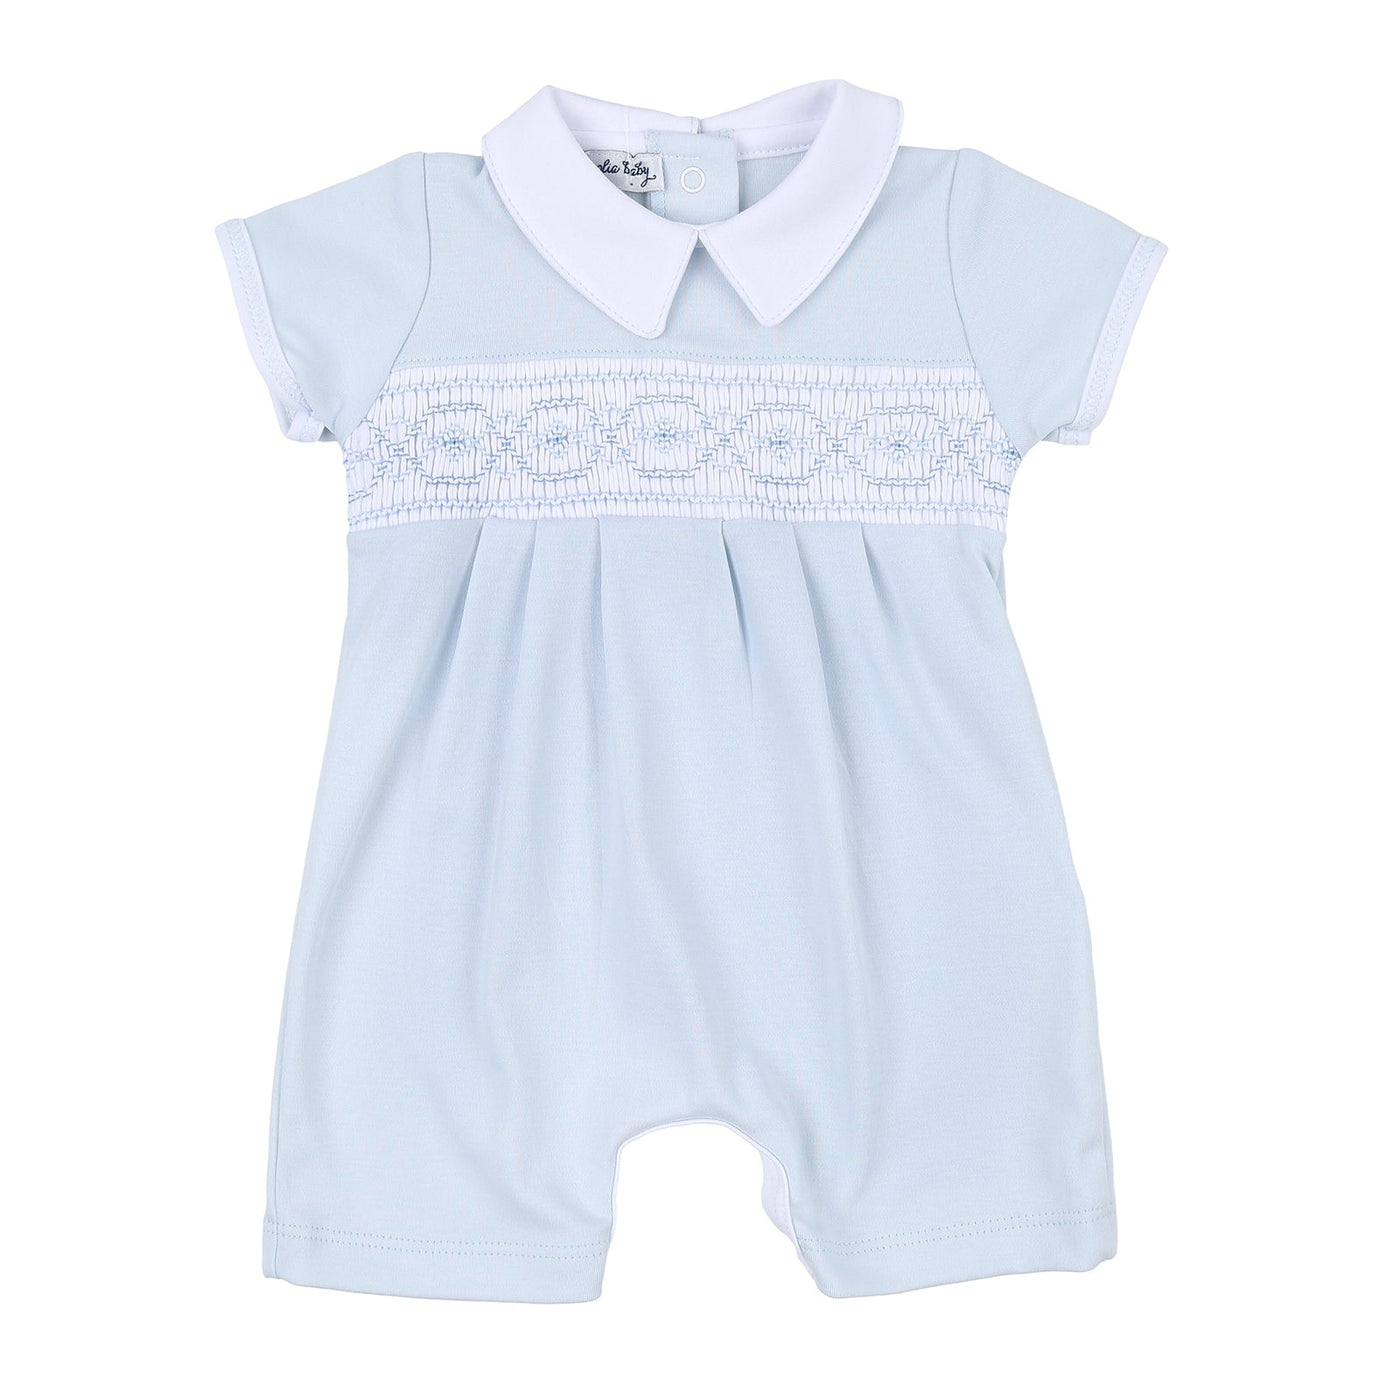 Light Blue Smocked Collared Playsuit